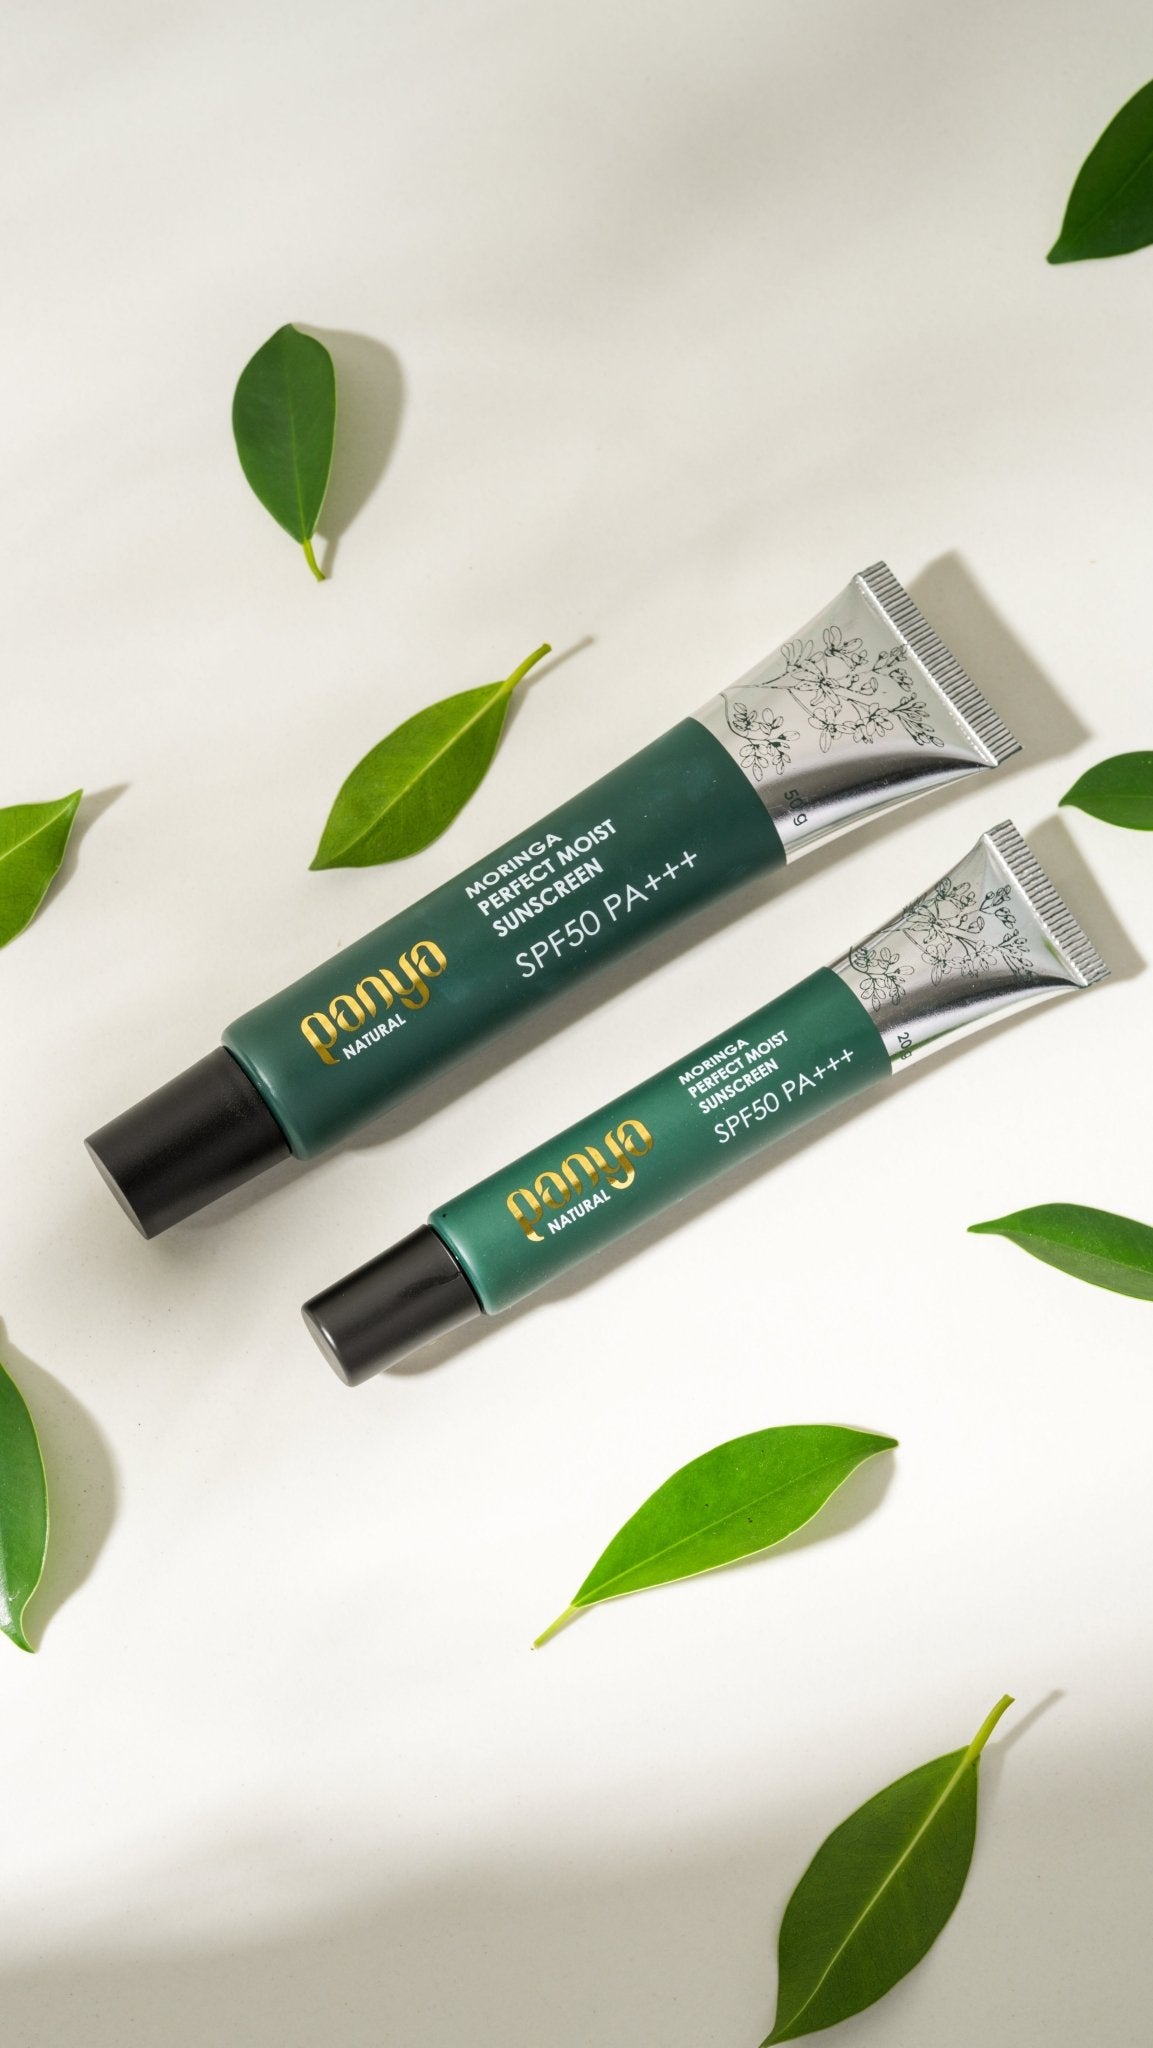 Panya - Moist Sunscreen SPF50: hydrating & oil-balancing for the skin, with Thai moringa & other essential oils for a potent, natural sun & pollution protection. 